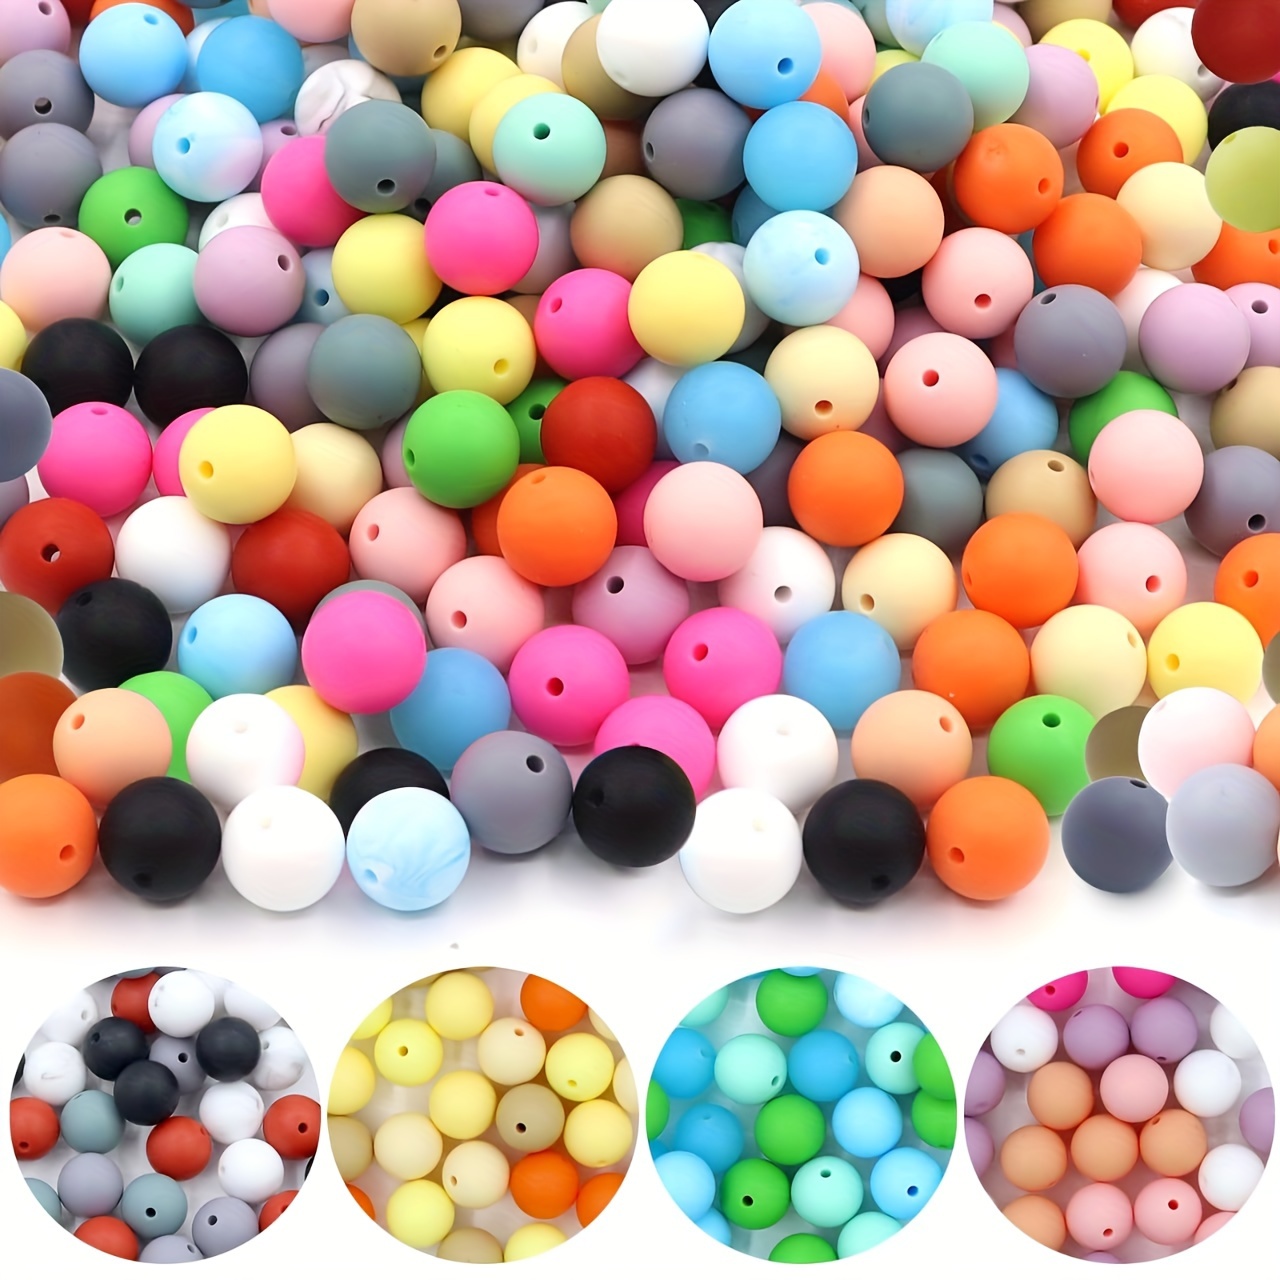 Wholesale 15mm Silicone Beads, Round Shapes Beads, Mix Print Silicone  Beads, Soft Silicone Bead, Silicone Pearl, Jewelry Supplies